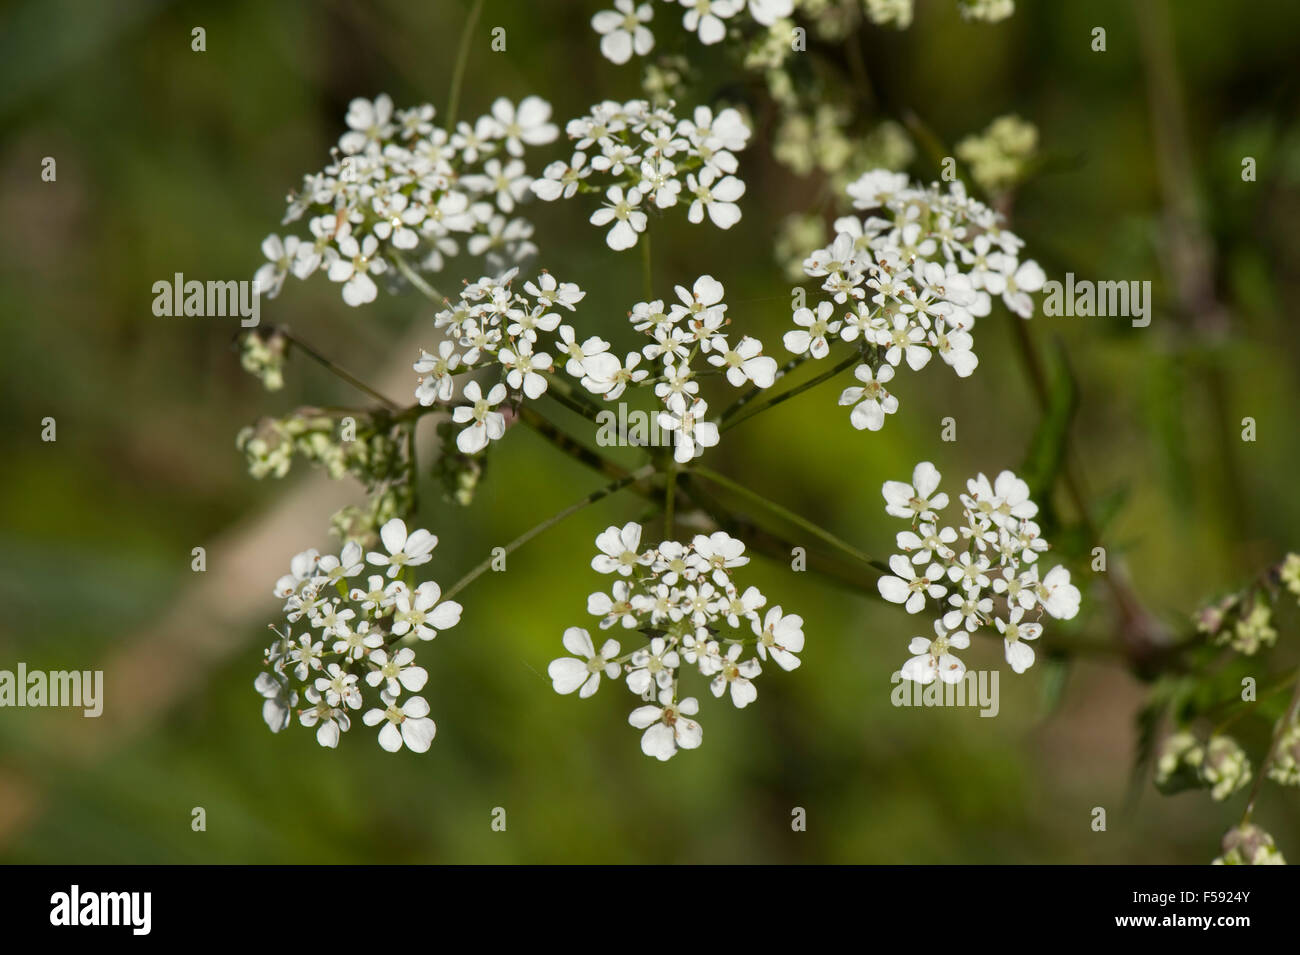 Cow parsley, Anthriscus sylvestris, flower umbel with white florets in spring and before hogwseed appears, May Stock Photo